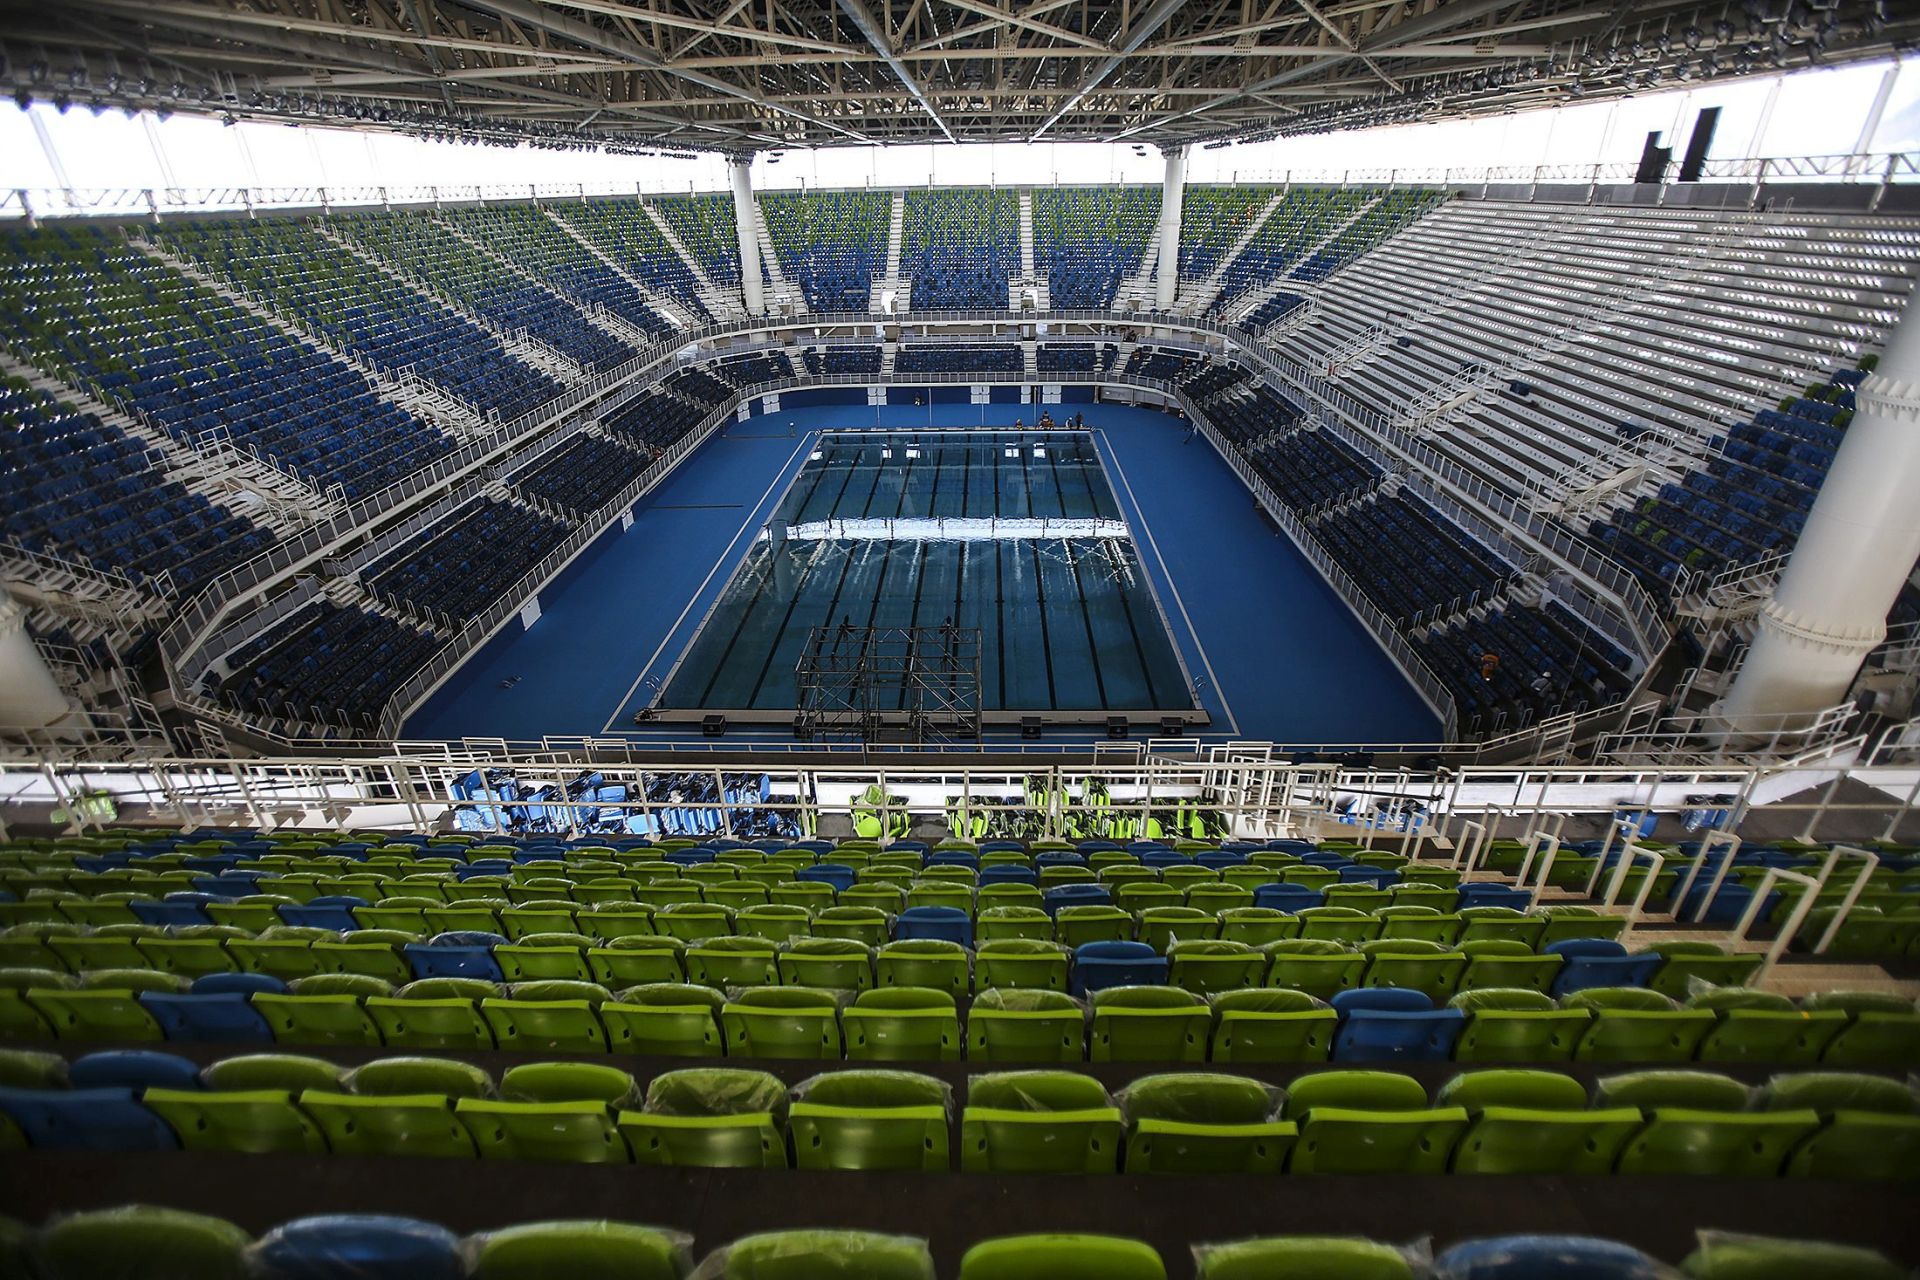 epa05244078 General view of the Estadio Acuatico Olimpico with a capacity for 18 thousand people at the Centro Olimpico in Rio de Janeiro, Brazil, on 04 April 2016. The Estadio Acuatico will be the venue for the swimming competitions and the final of water polo for the Olympic Games Rio 2016.  EPA/Antonio Lacerda